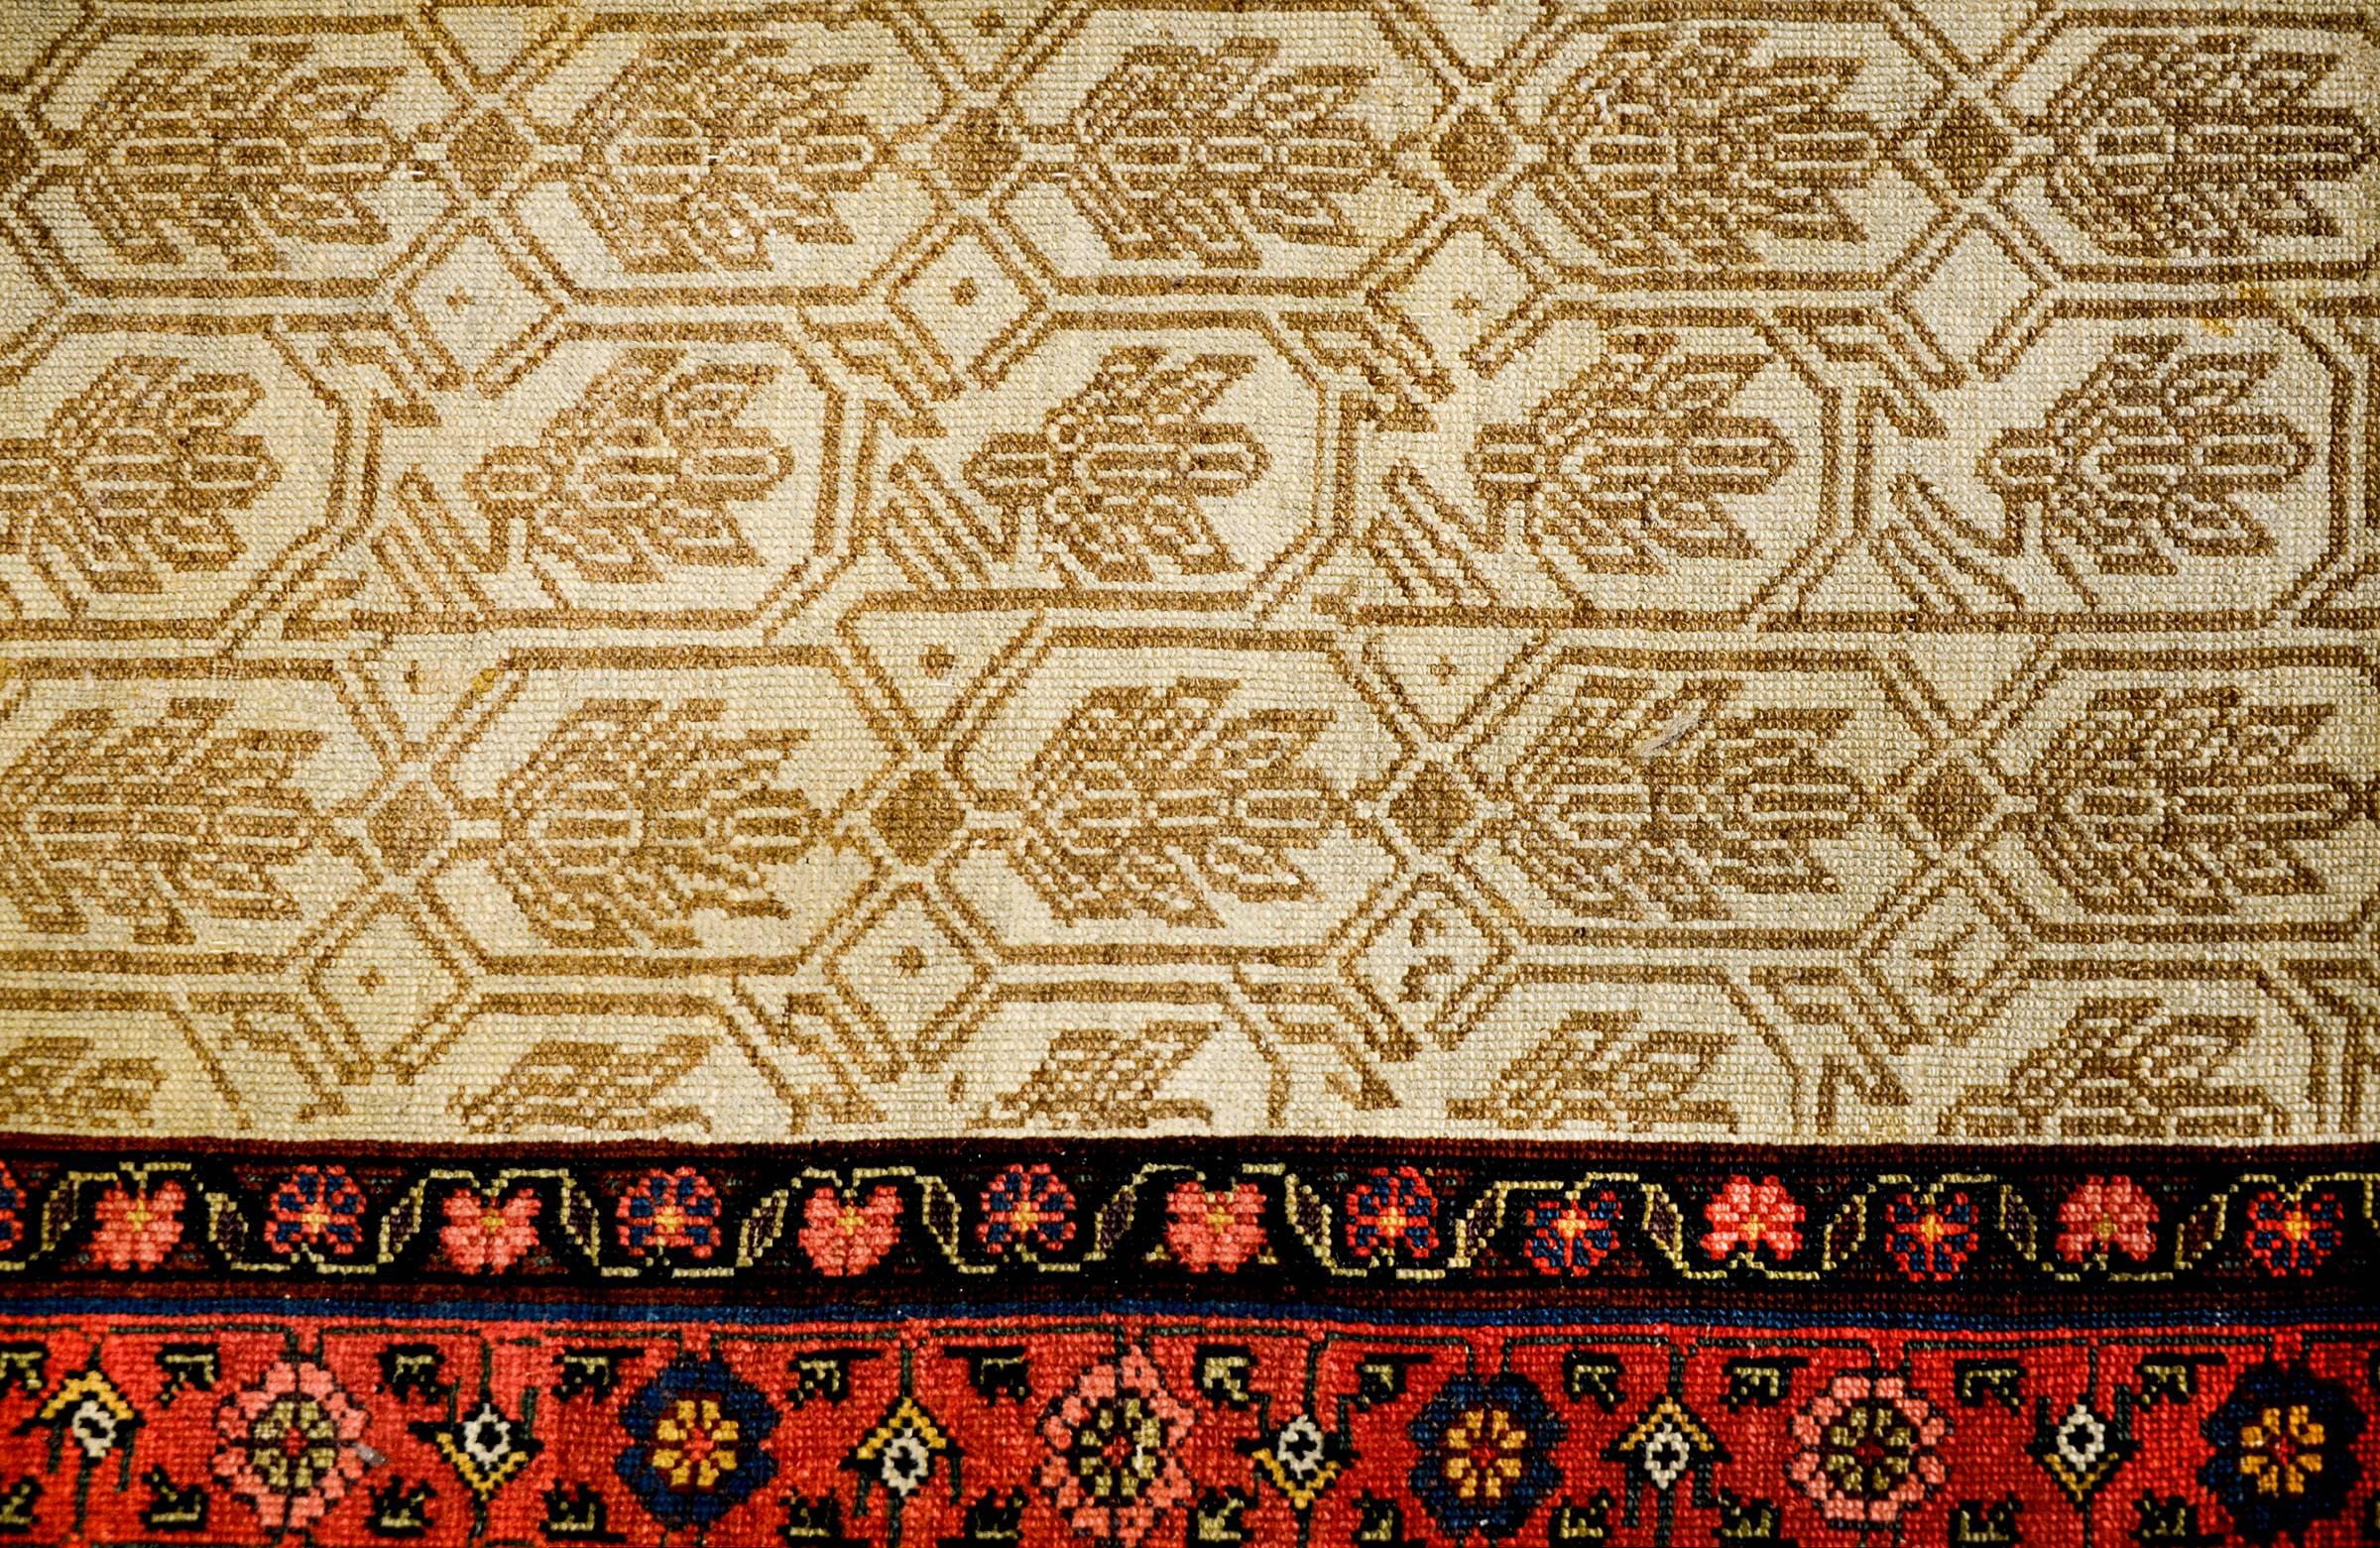 An exceptional Persian Serab runner circa 1900 with an incredible field depicting a beautiful trellis pattern with large-scale leaves woven in a fantastic natural undyed cream and beige wool. The border is wonderful with multicolored flowers and